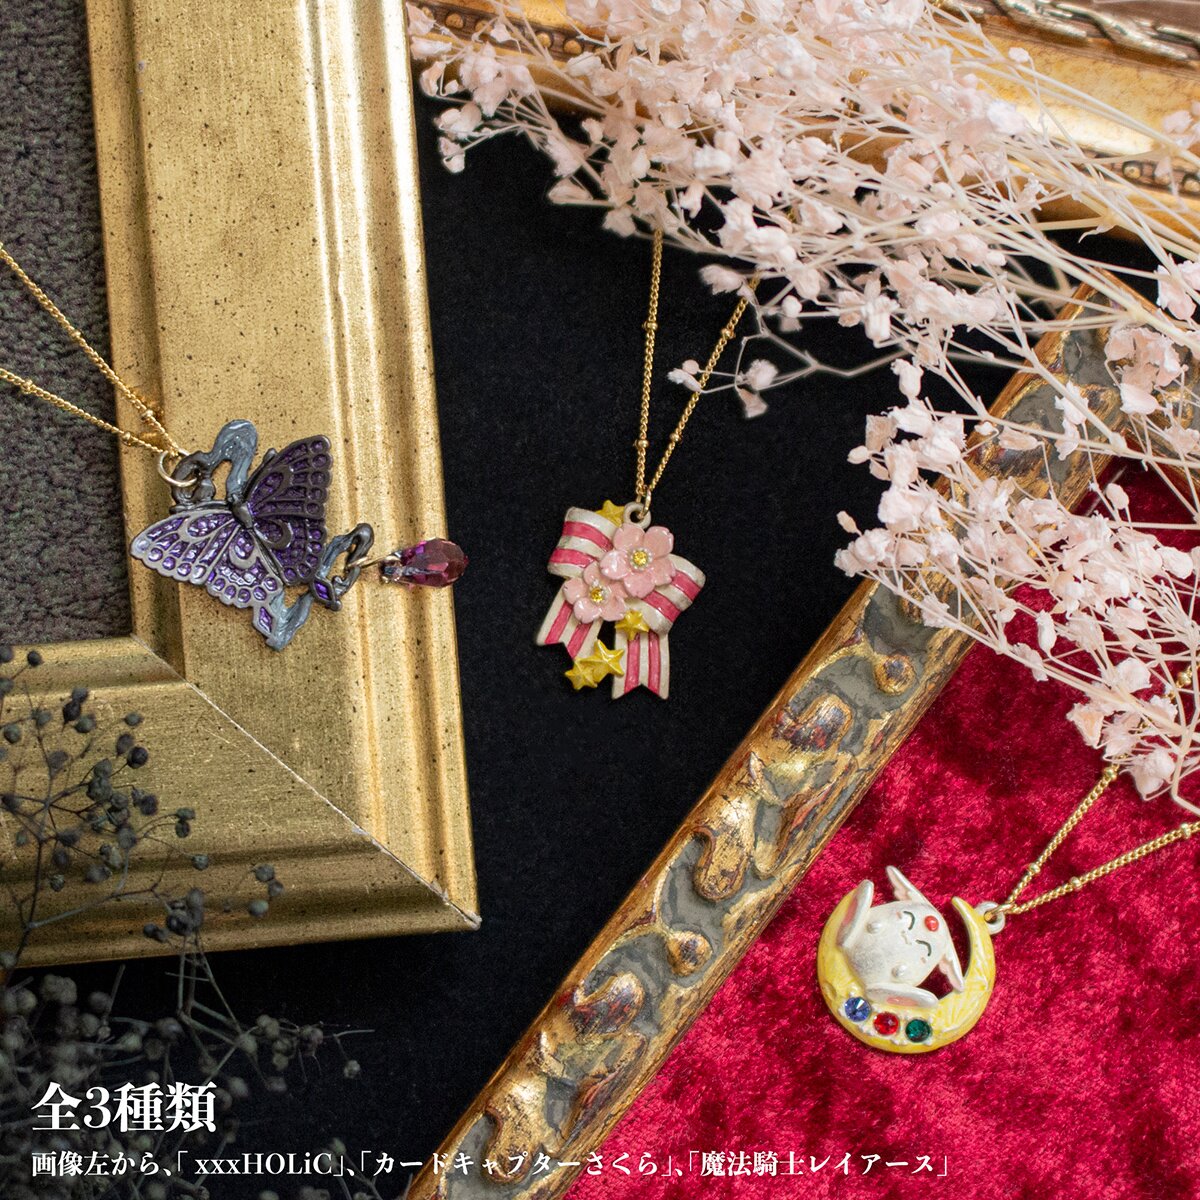 CLAMP 30th Anniversary xxxHolic Necklace